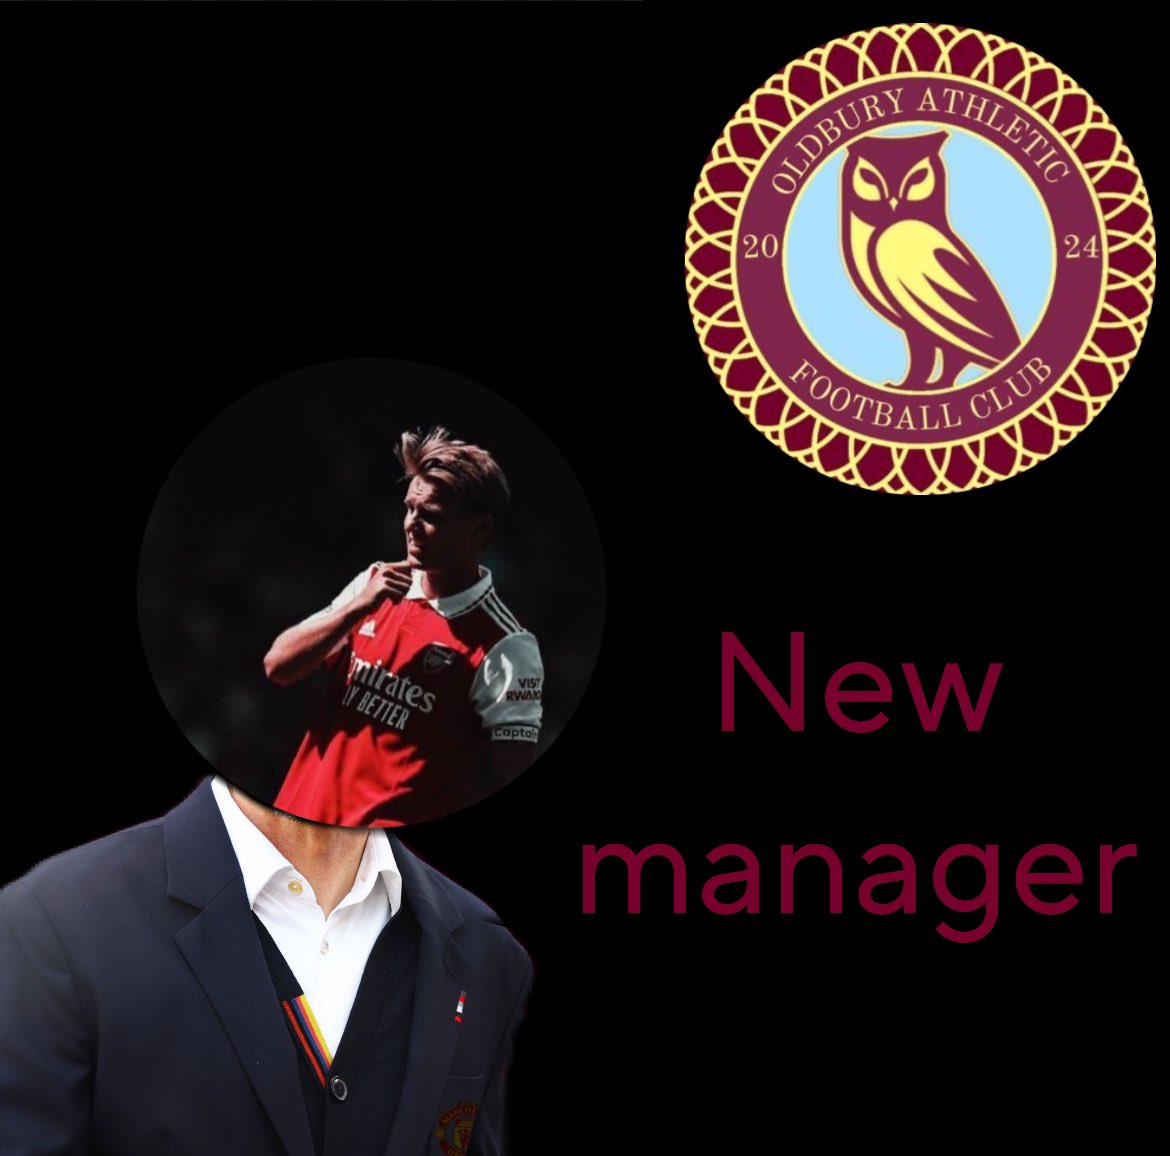 WE ARE HAPPY TO ANNOUNCE THE RETURN OF @AFC_NOIF AS ARE NEW MANAGER 🤩

UP THE OWLS 💜💙🦉